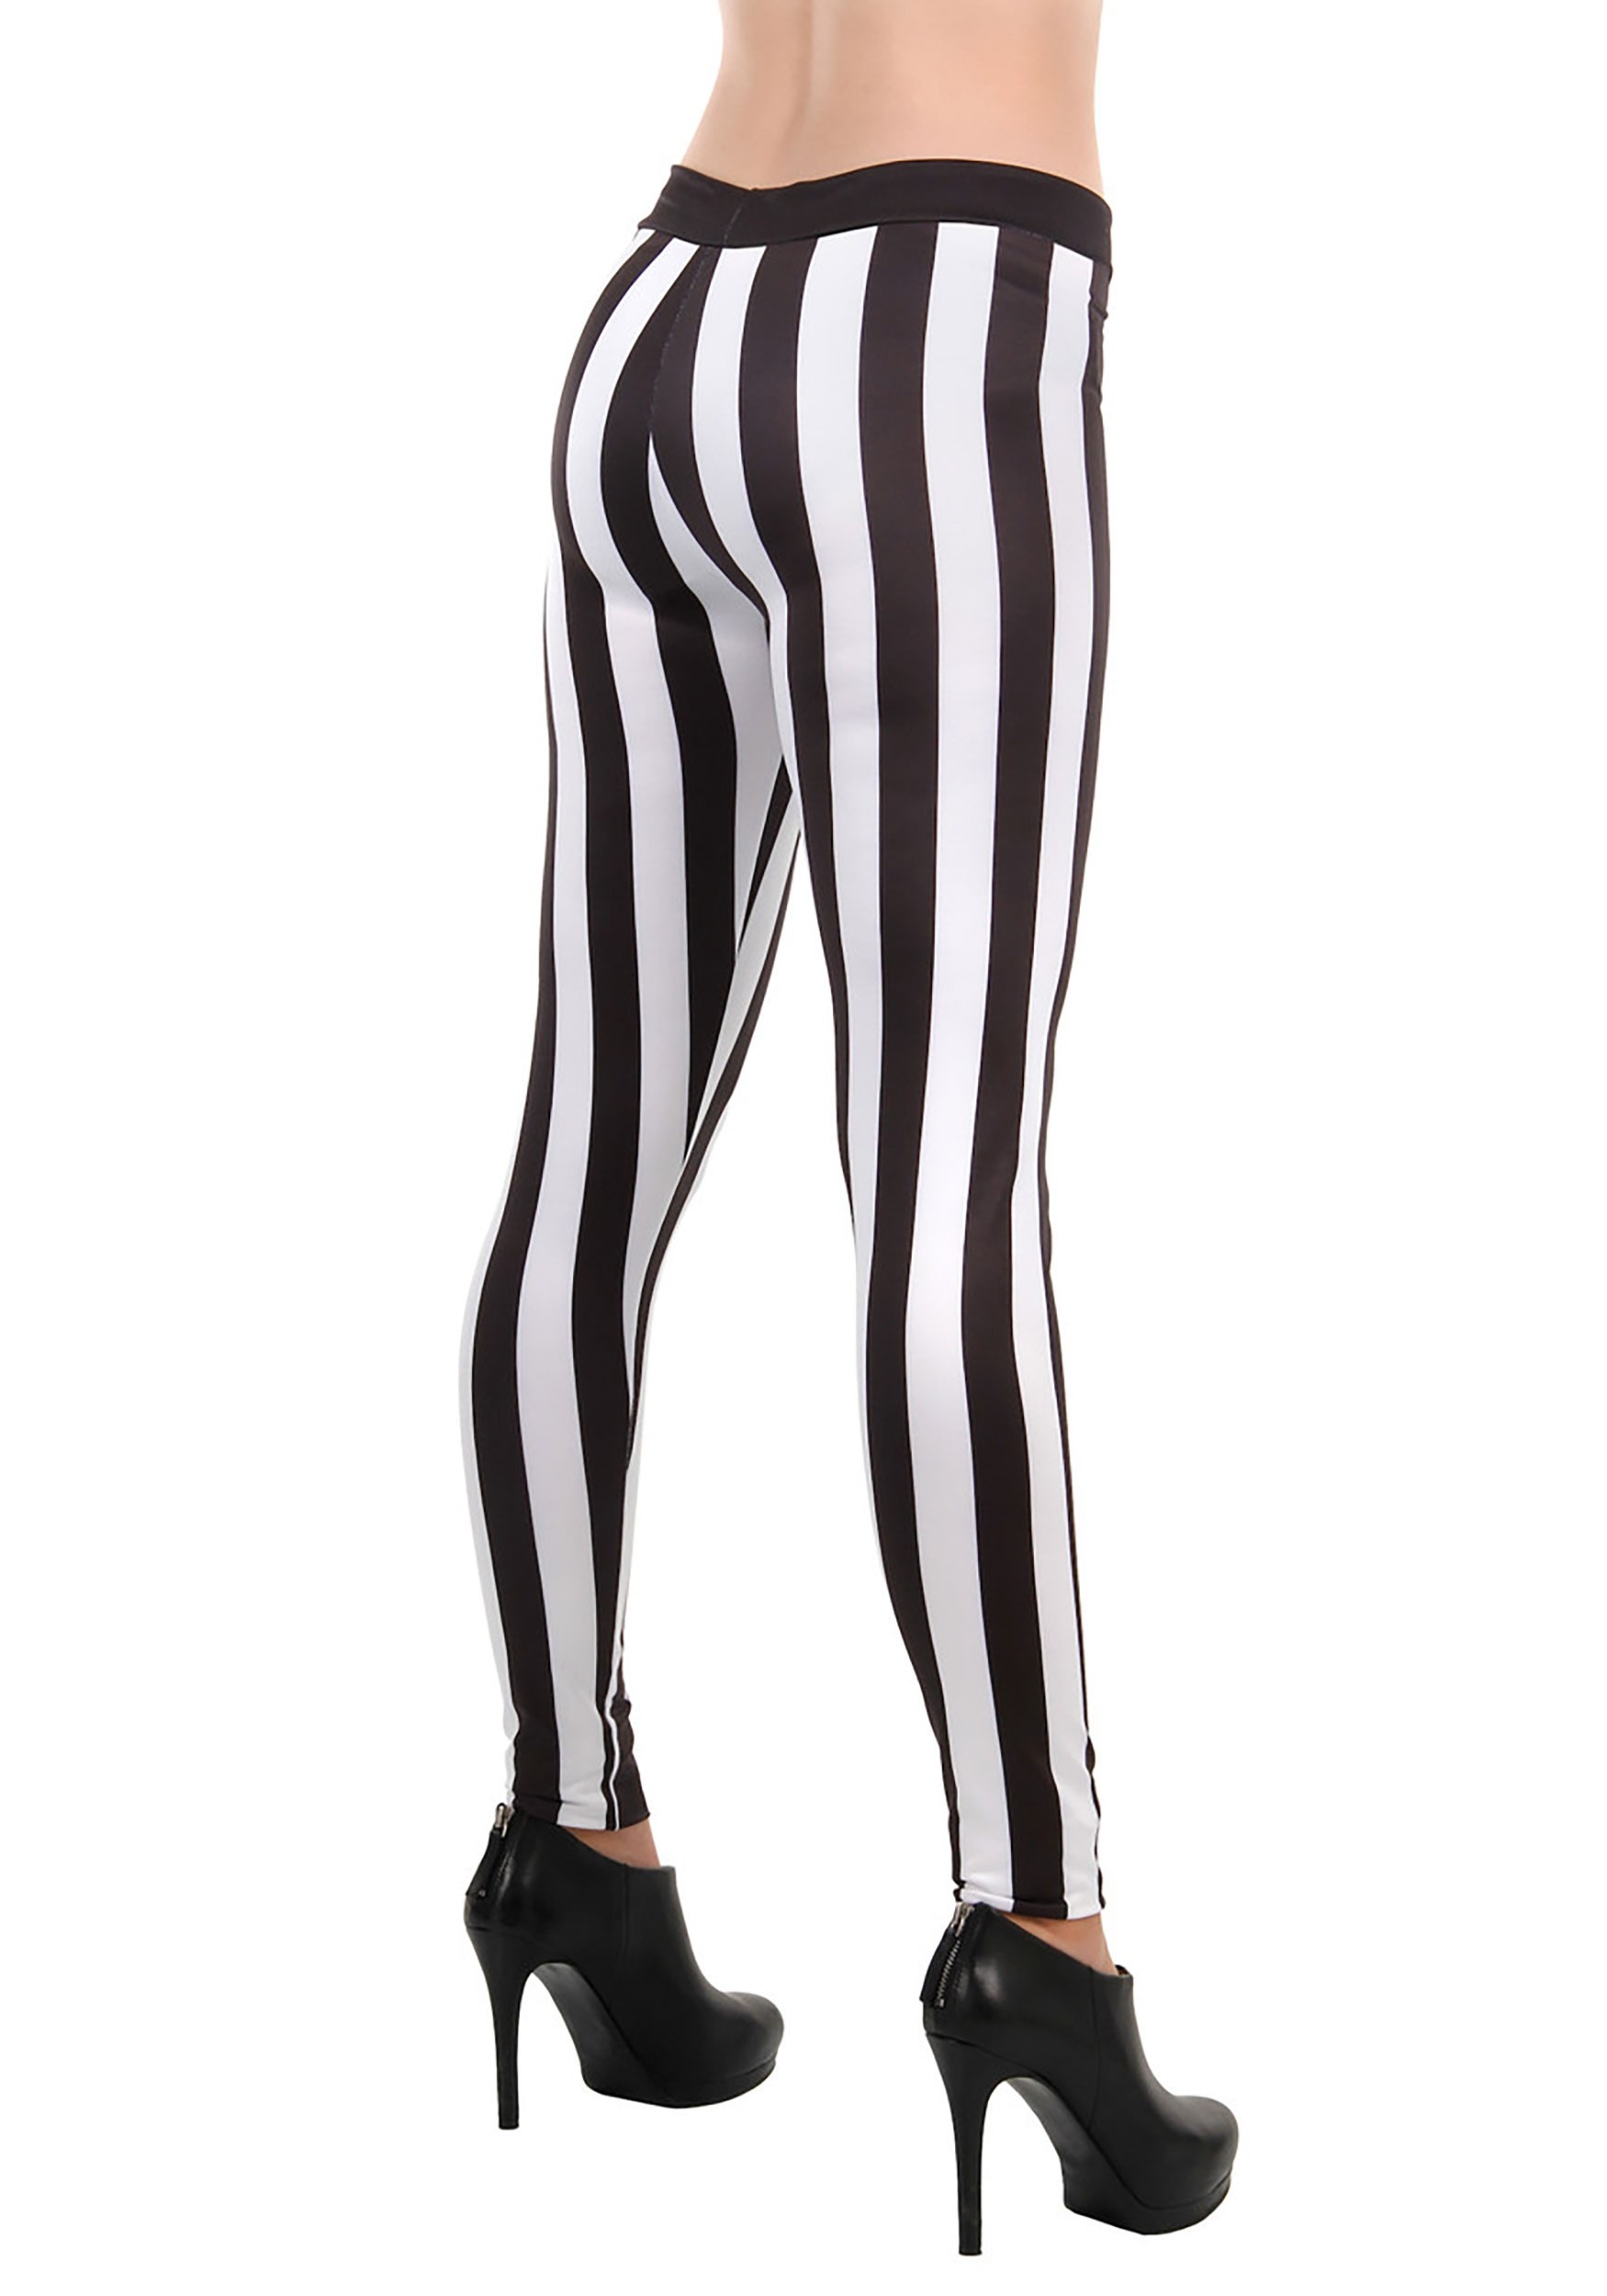 Black and White Halloween Leggings for Women and Teens, Two Tone